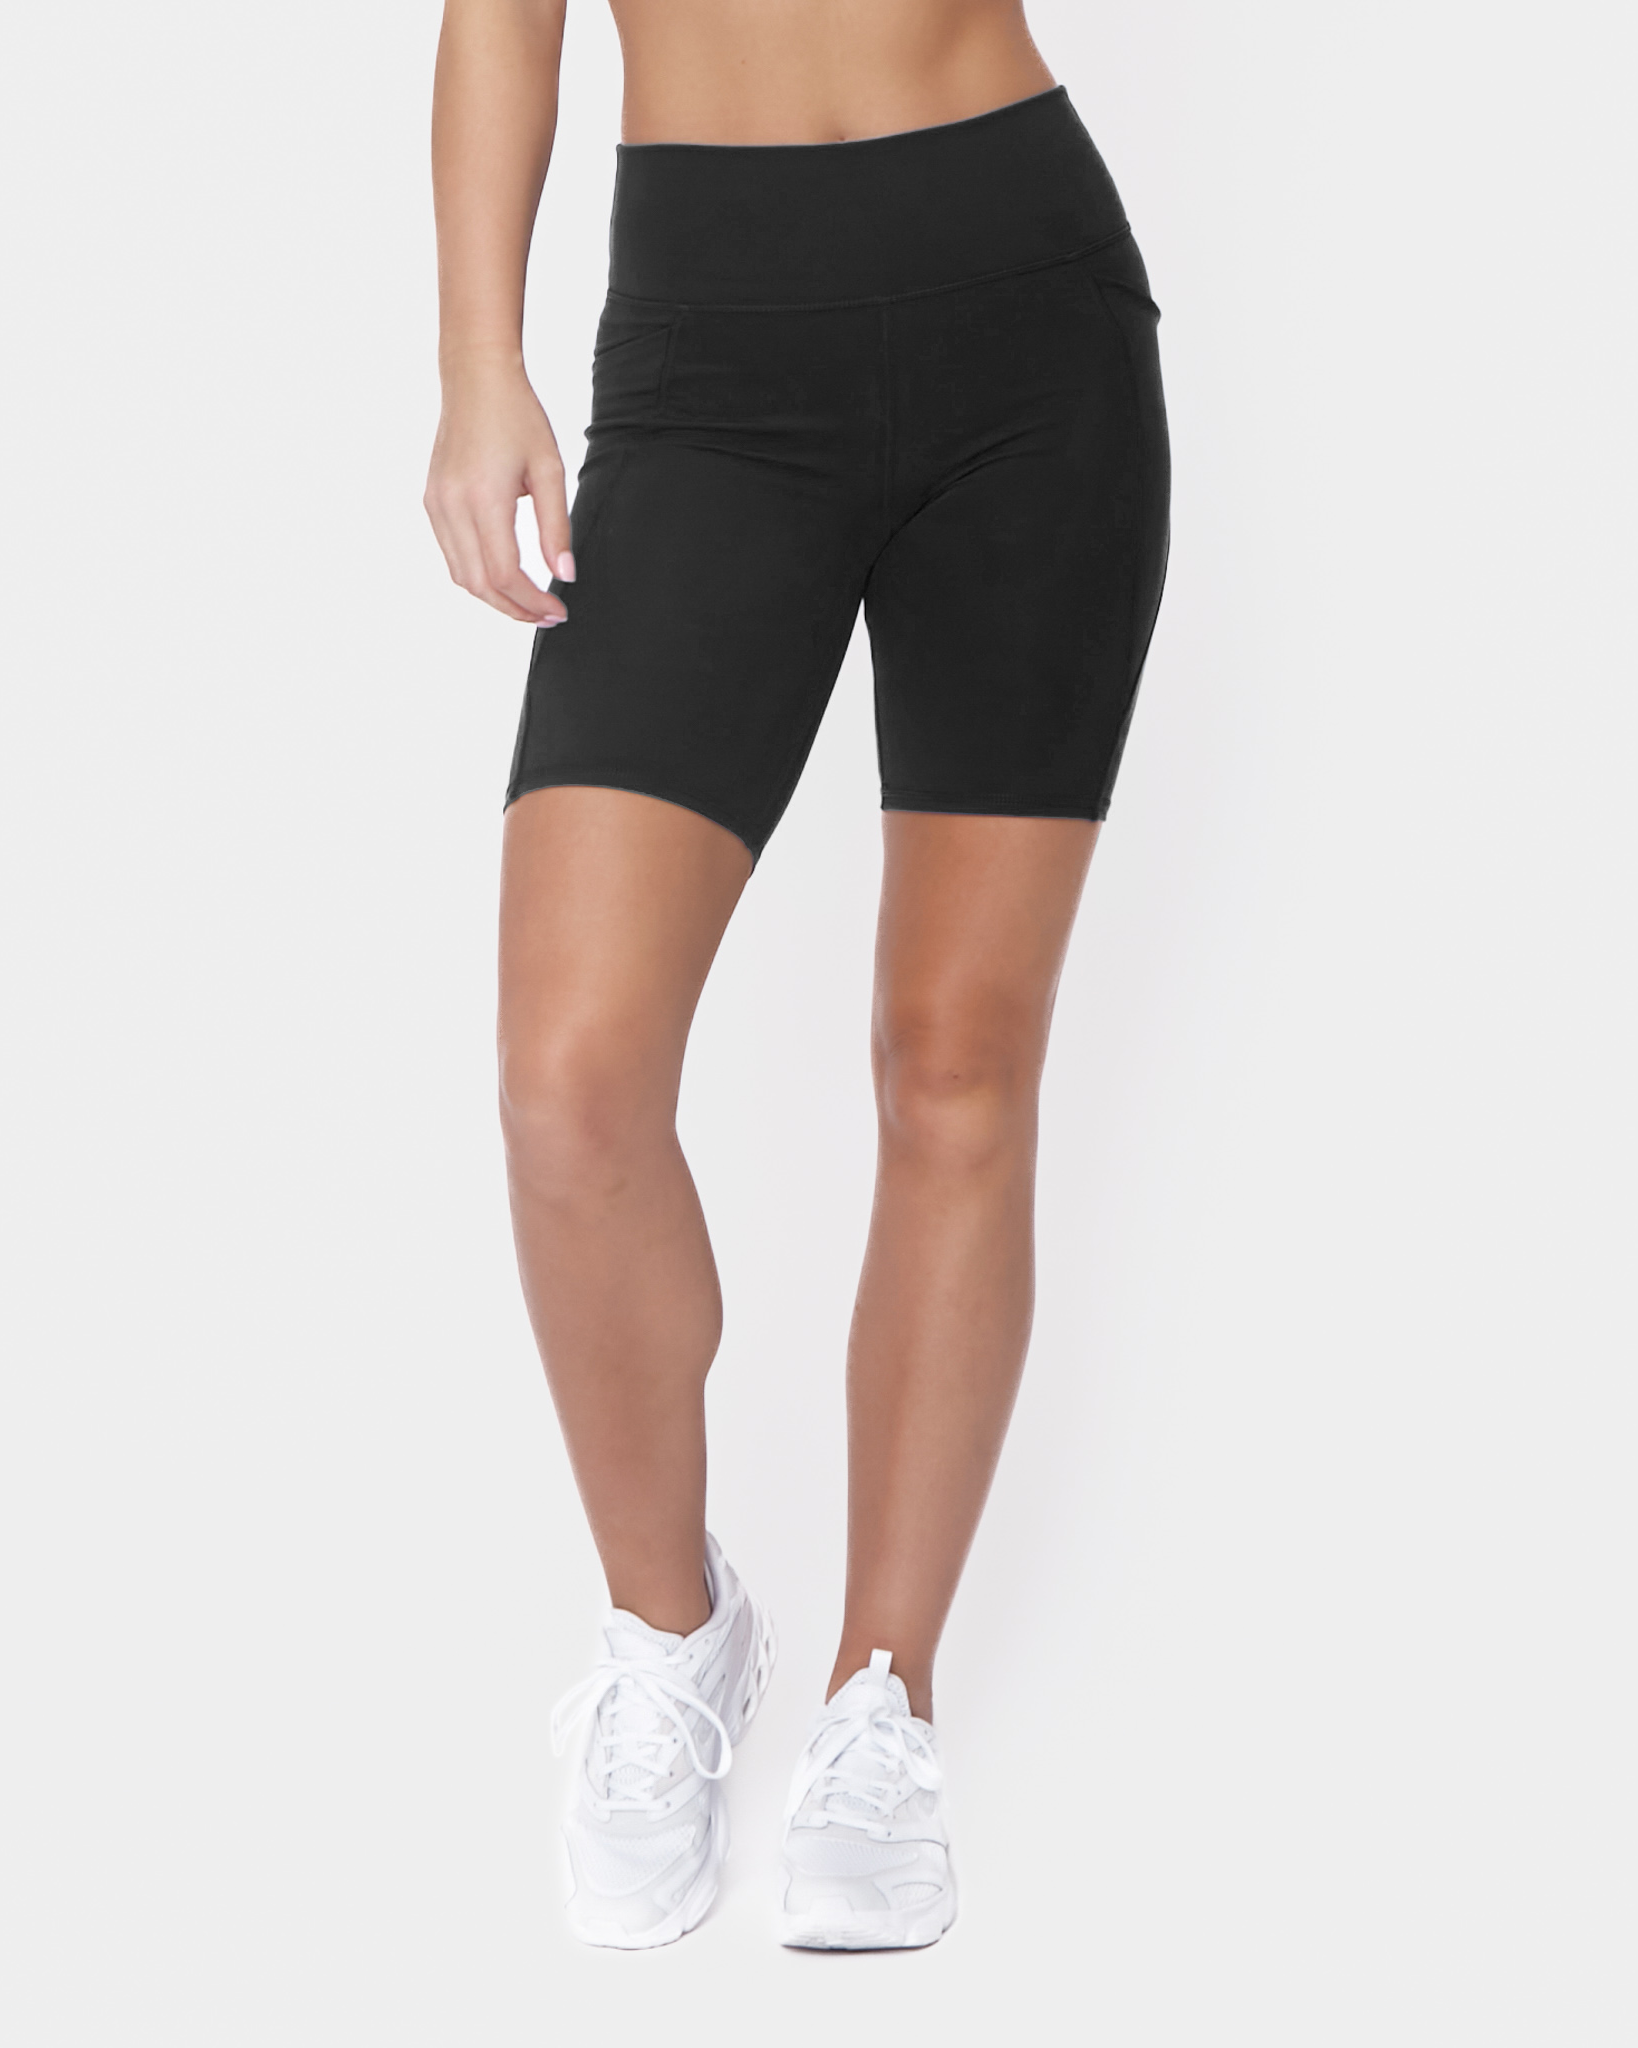 Seamless Biker Shorts For Women Perfect For Summer Workouts, Gym